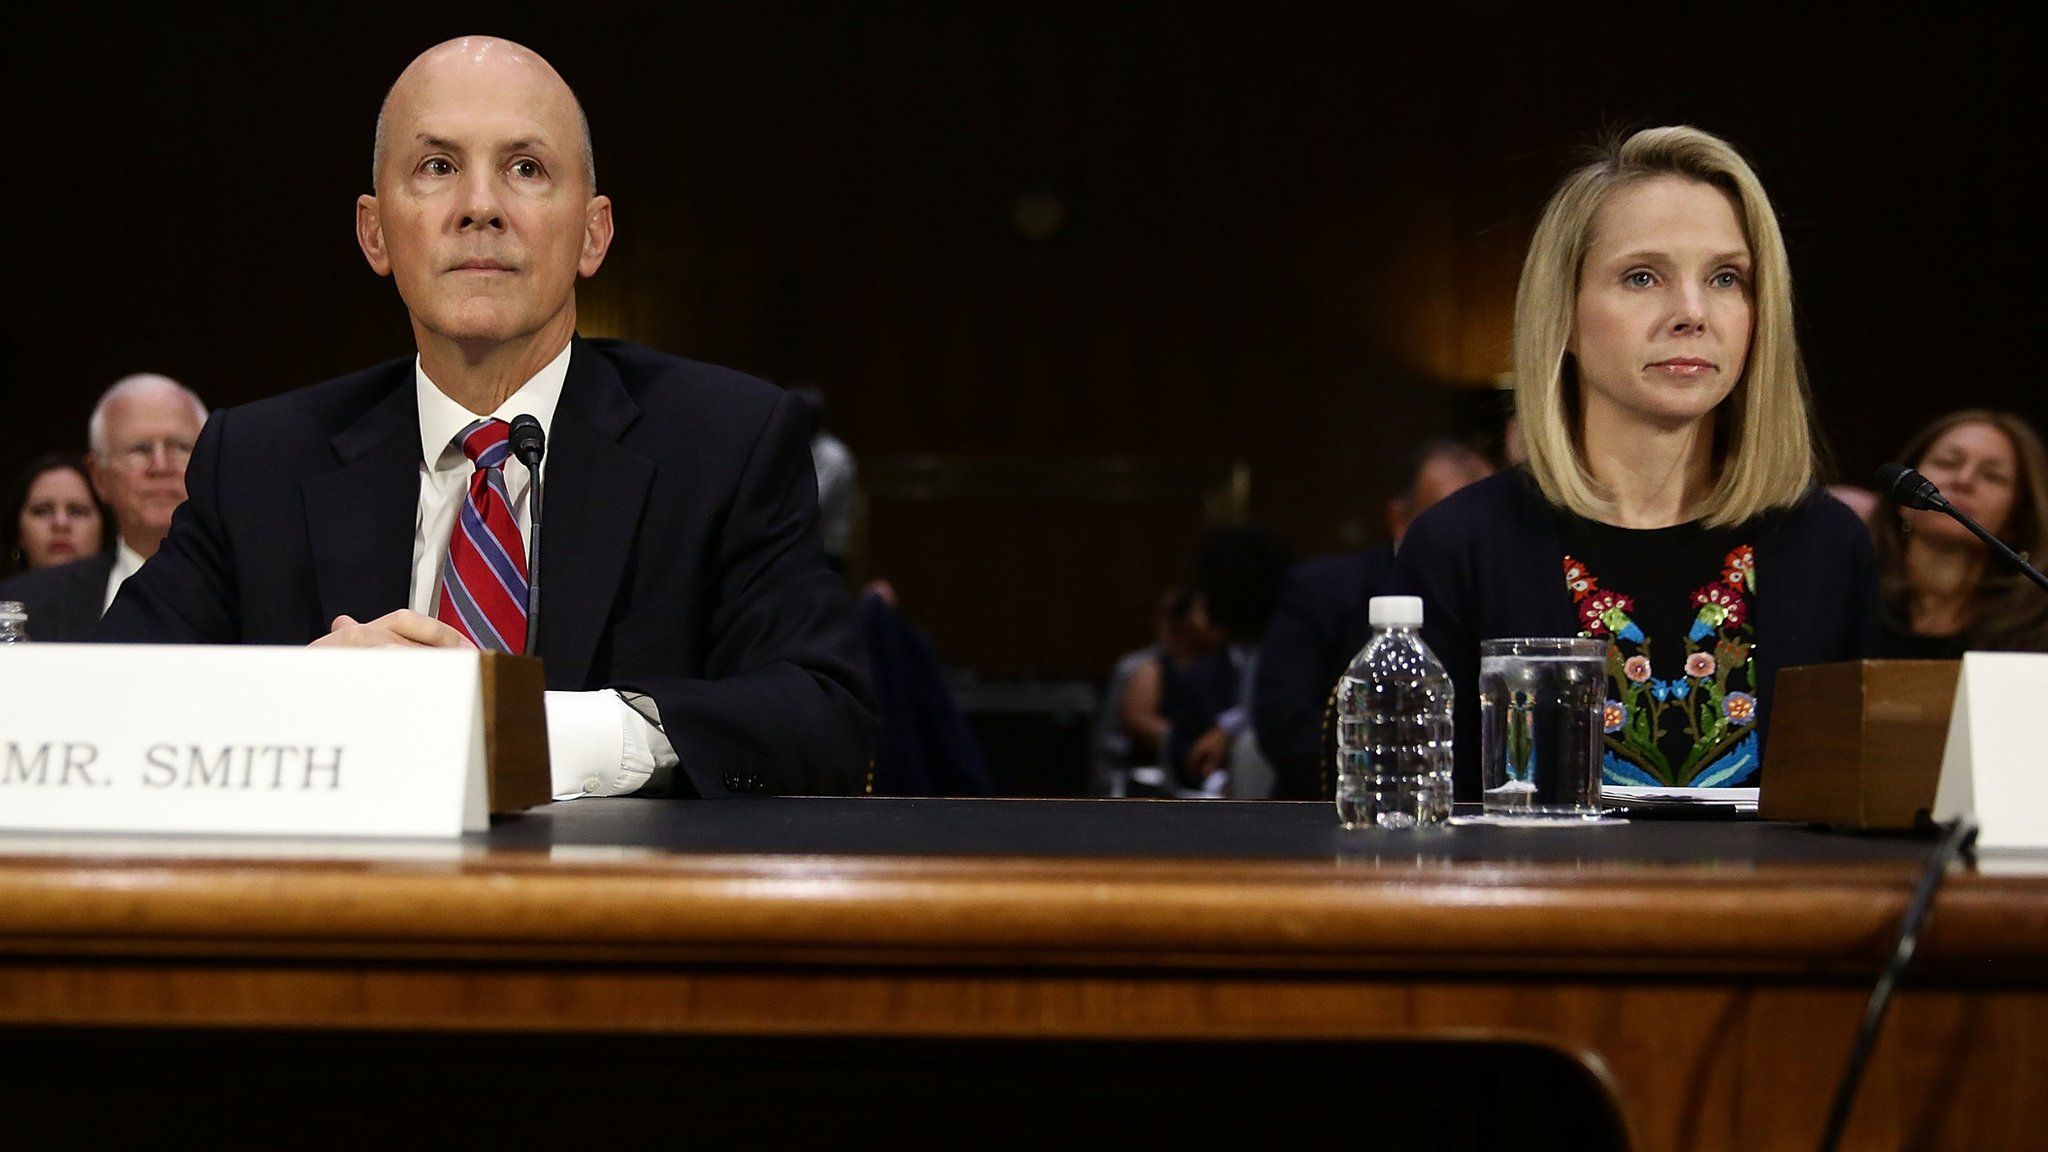 Former CEO of Equifax Richard Smith (L) and former CEO of Yahoo Marissa Mayer (R) wait for the beginning of a hearing before Senate Commerce, Science and Transportation Committee November 8, 2017 on Capitol Hill in Washington, DC